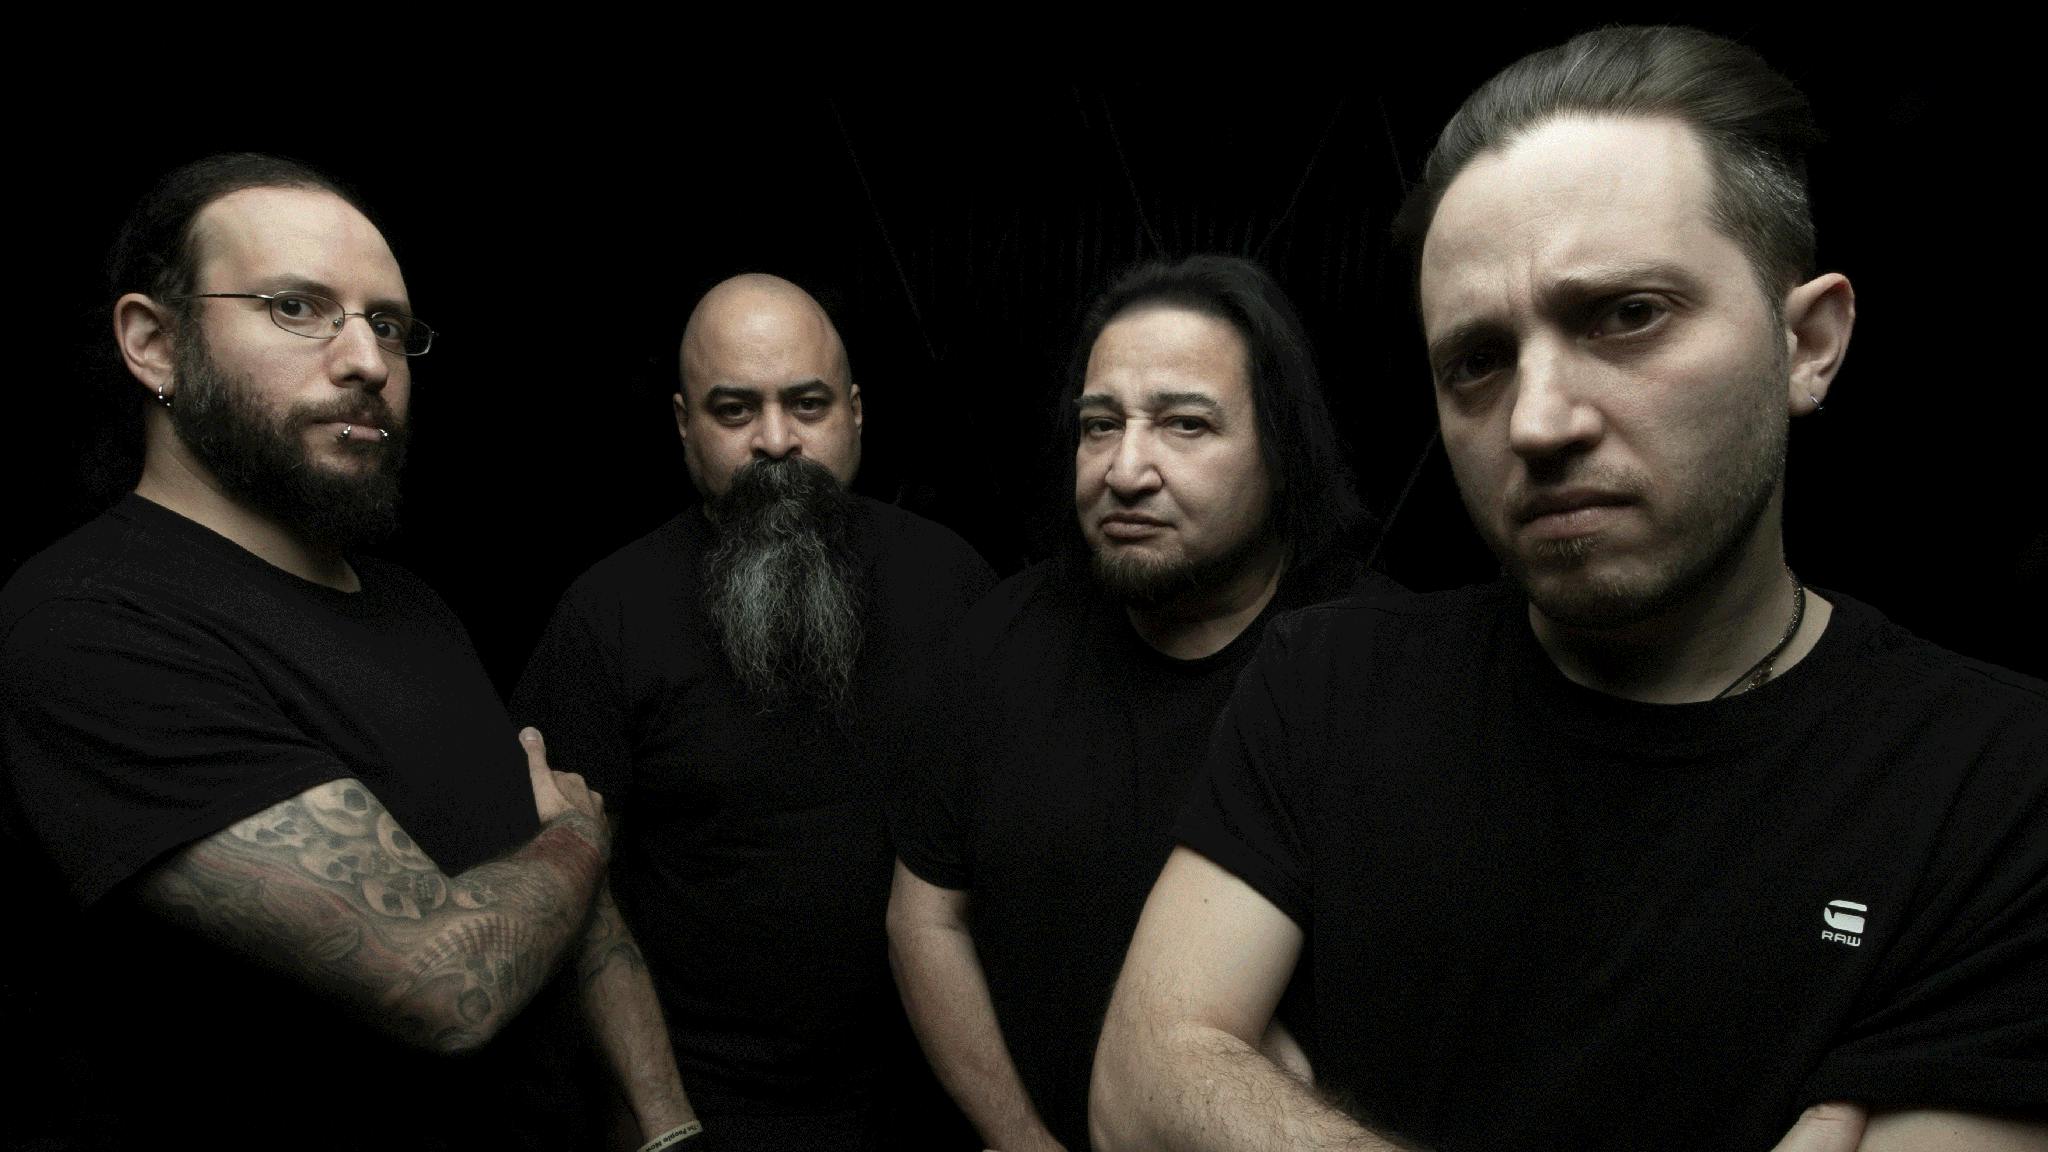 Fear Factory announce new vocalist: “The search was long and meticulous, but we got the right guy”